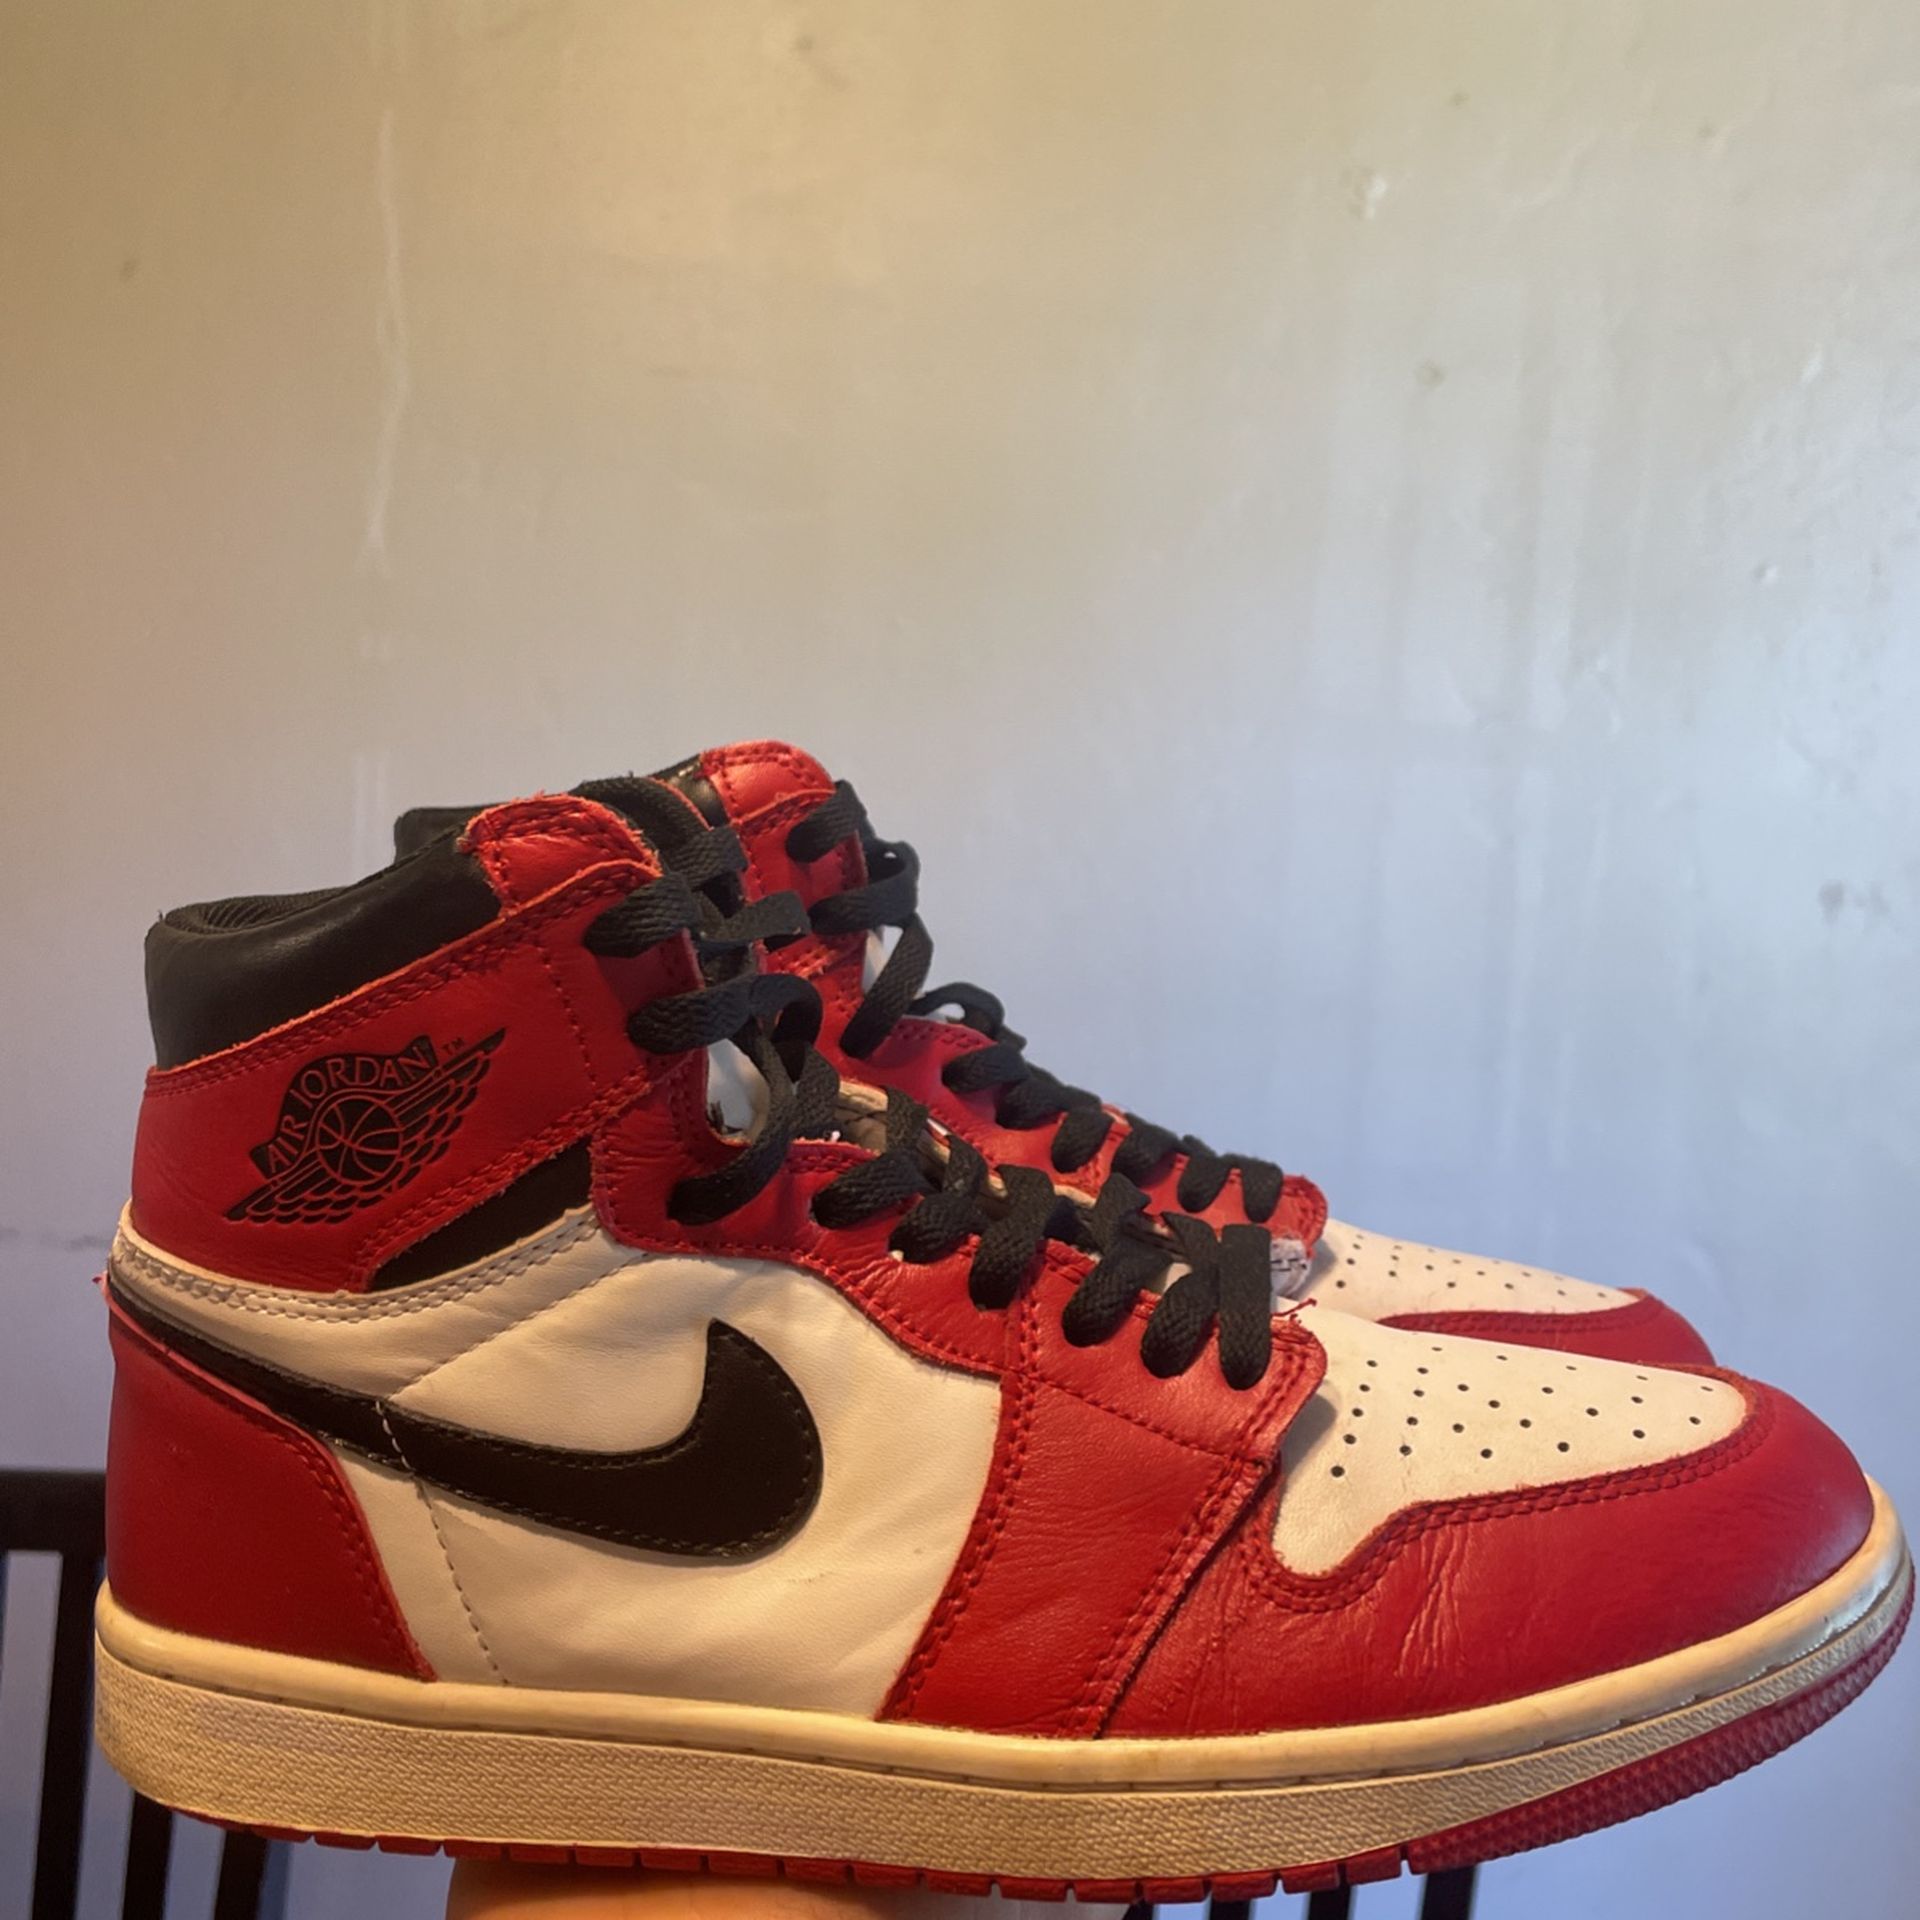 Jordan 1 Chicago lost and found good condition 